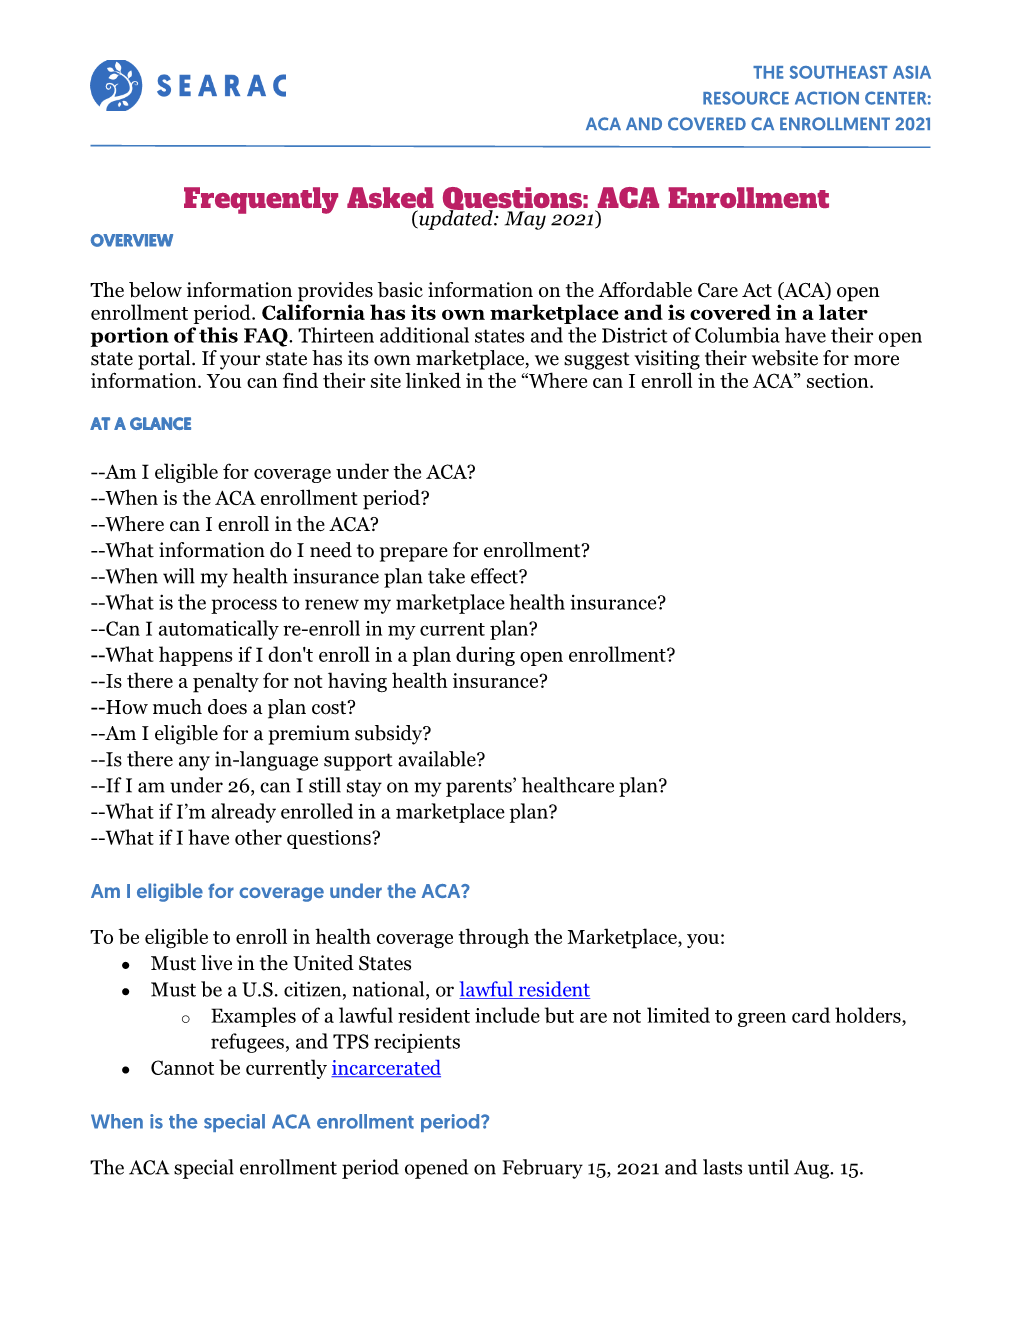 Frequently Asked Questions: ACA Enrollment (Updated: May 2021) OVERVIEW